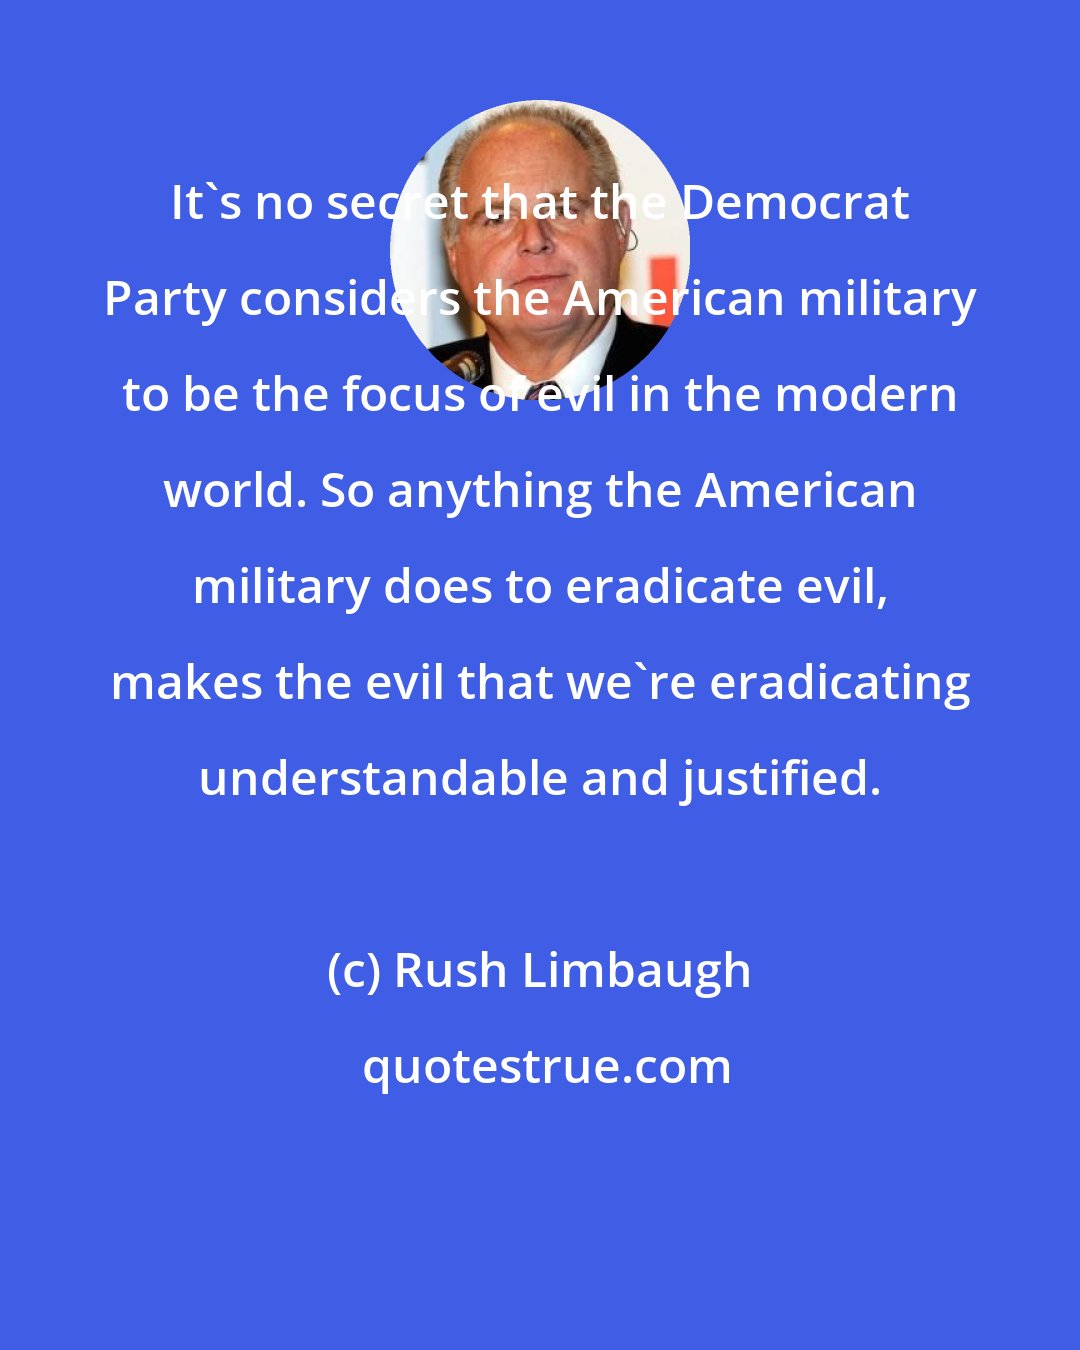 Rush Limbaugh: It's no secret that the Democrat Party considers the American military to be the focus of evil in the modern world. So anything the American military does to eradicate evil, makes the evil that we're eradicating understandable and justified.